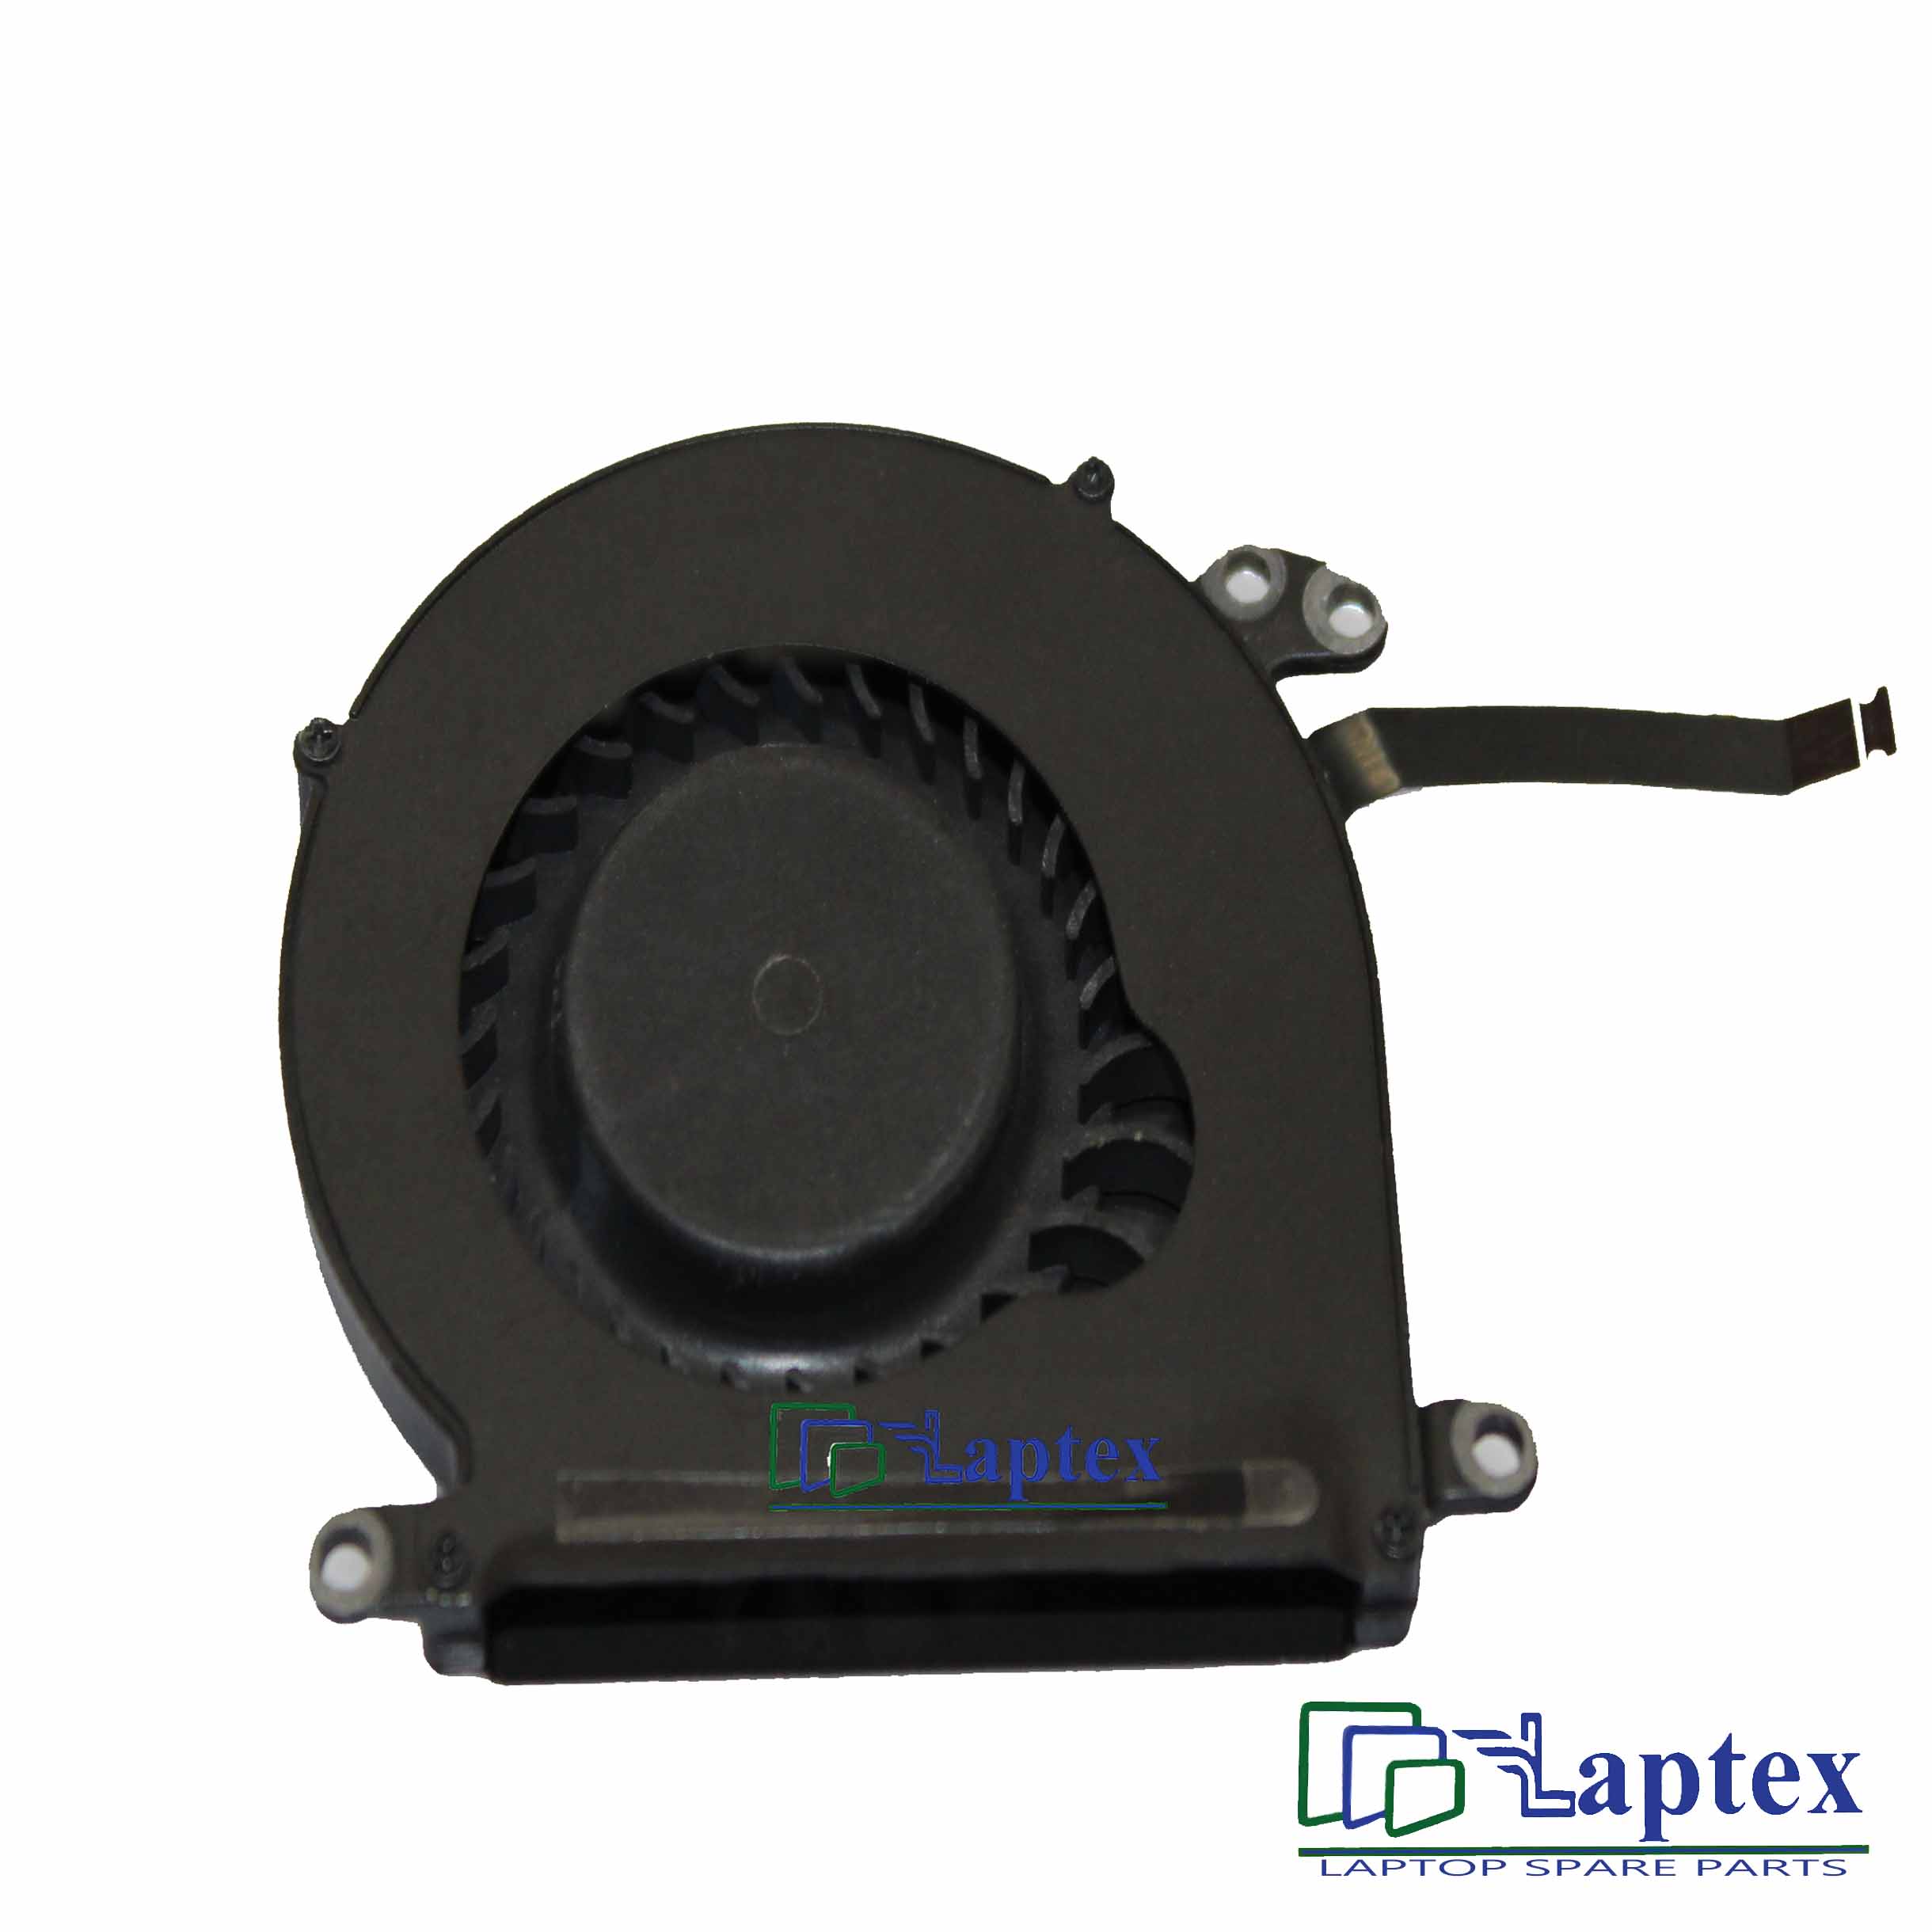 Air A1465 Cooling Fan